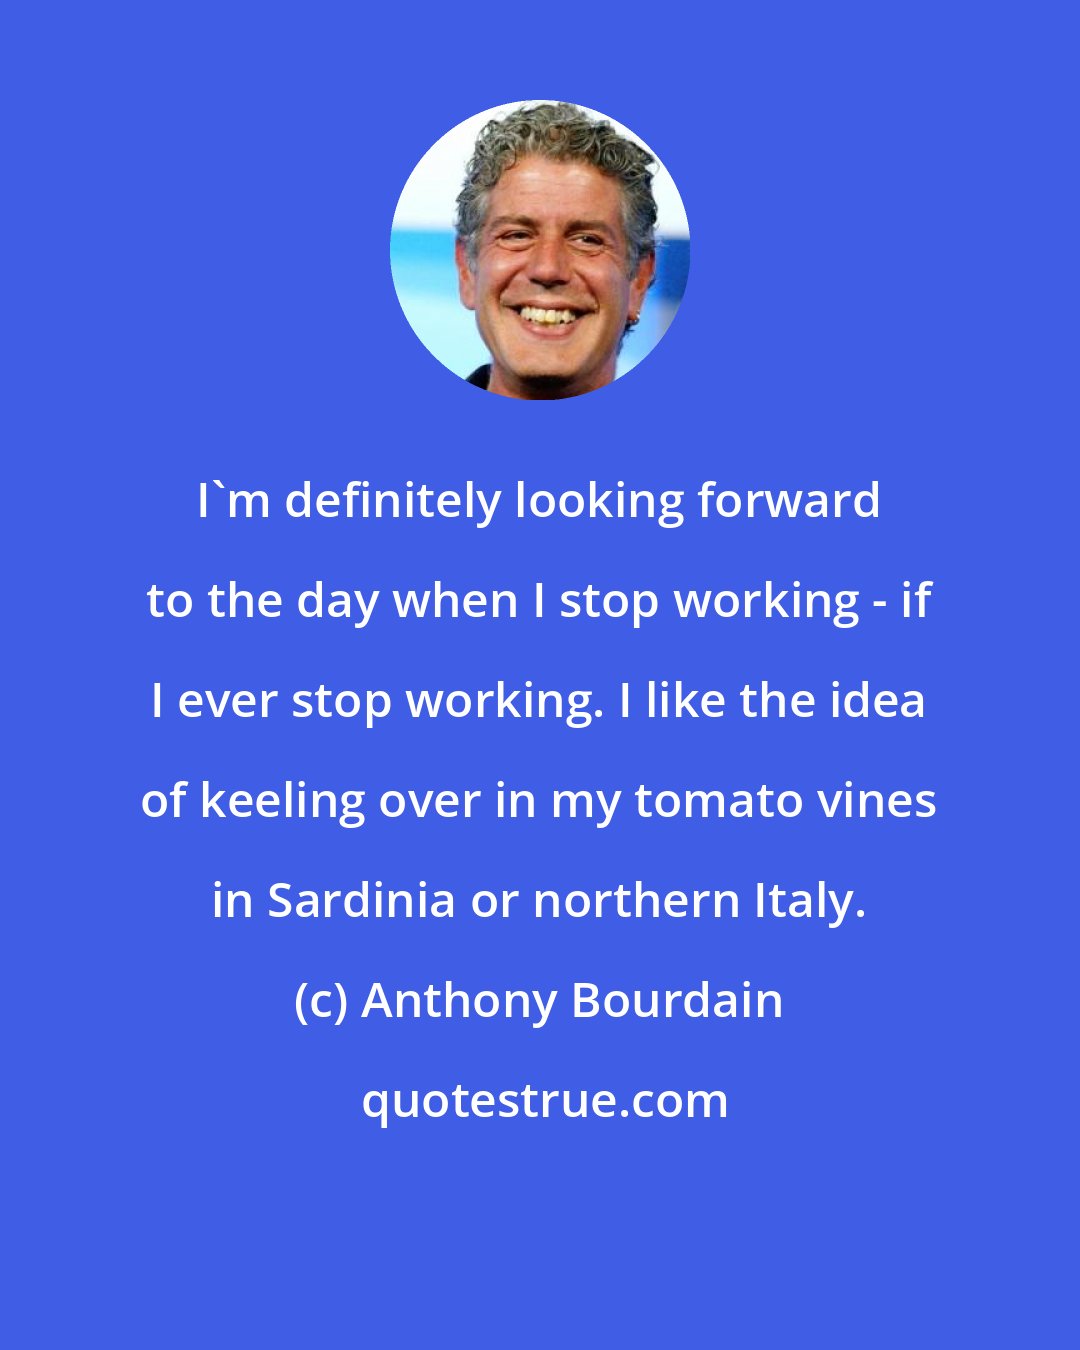 Anthony Bourdain: I'm definitely looking forward to the day when I stop working - if I ever stop working. I like the idea of keeling over in my tomato vines in Sardinia or northern Italy.